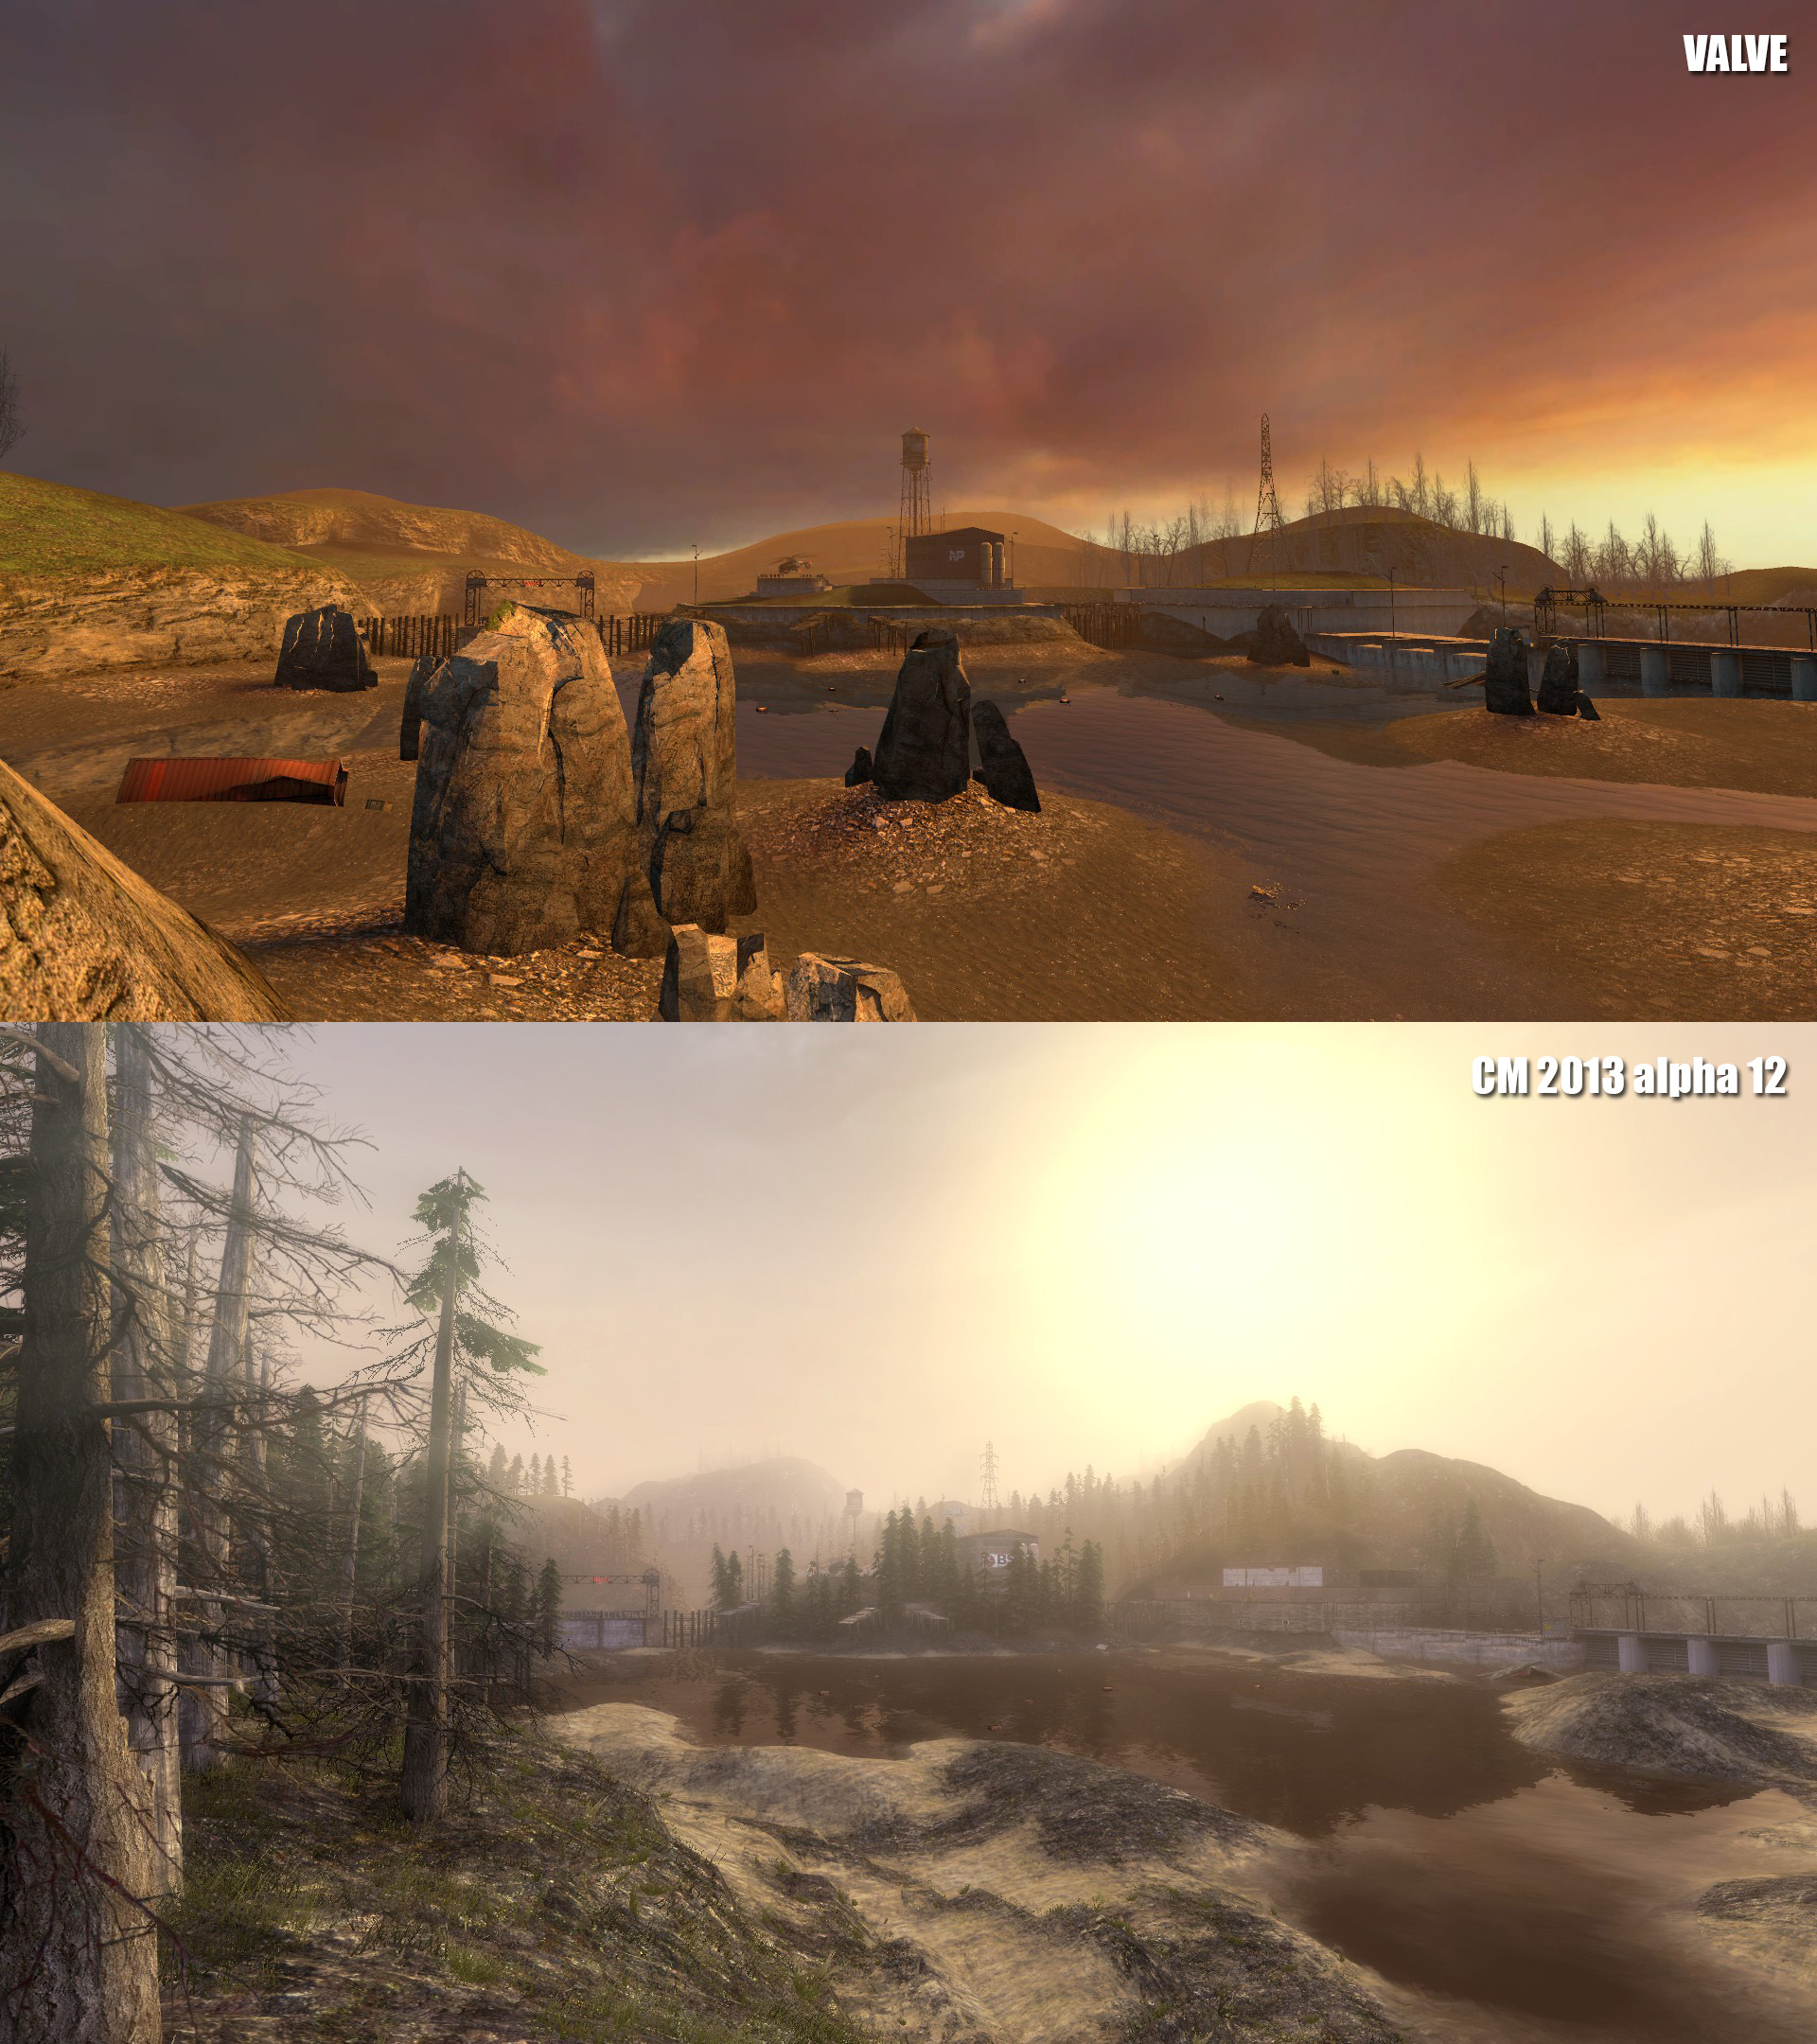 Reminder: On PC, Games Only Look Better With Age